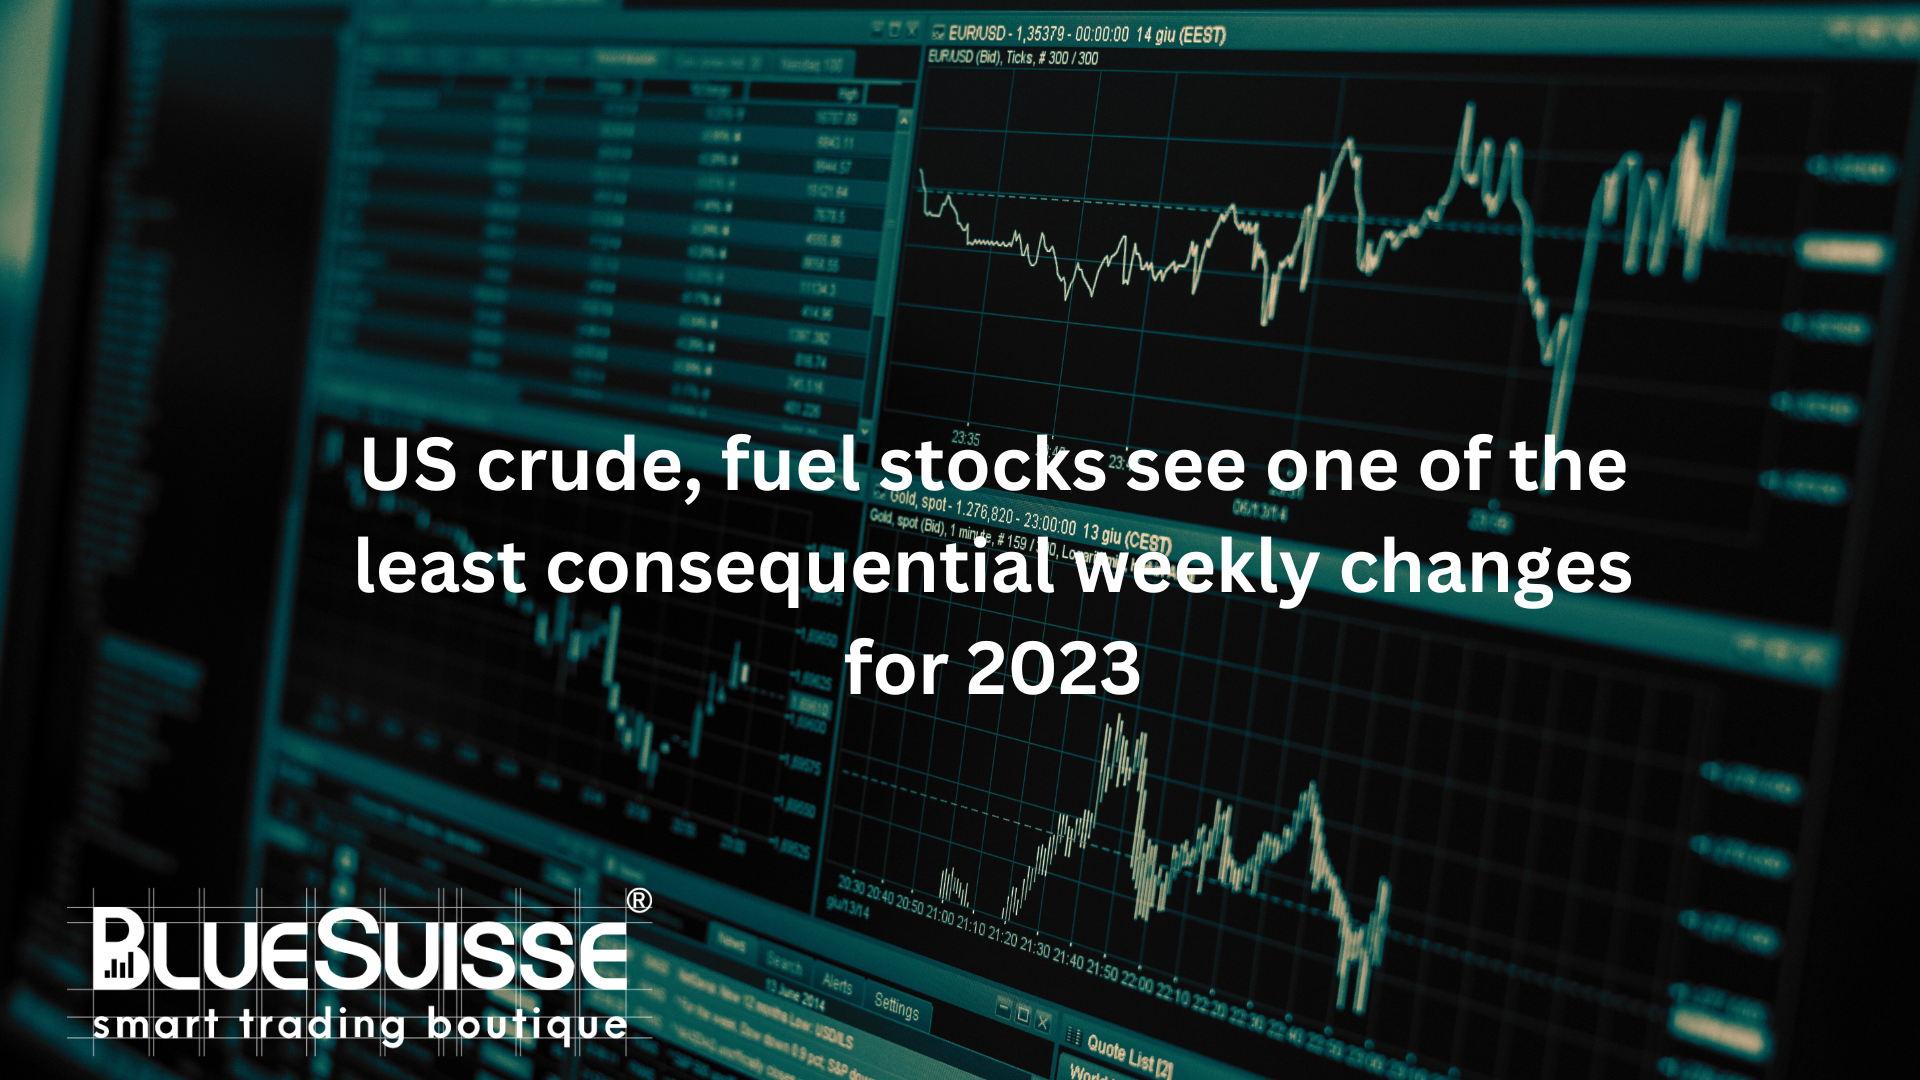 US crude, fuel stocks see one of the least consequential weekly changes for 2023